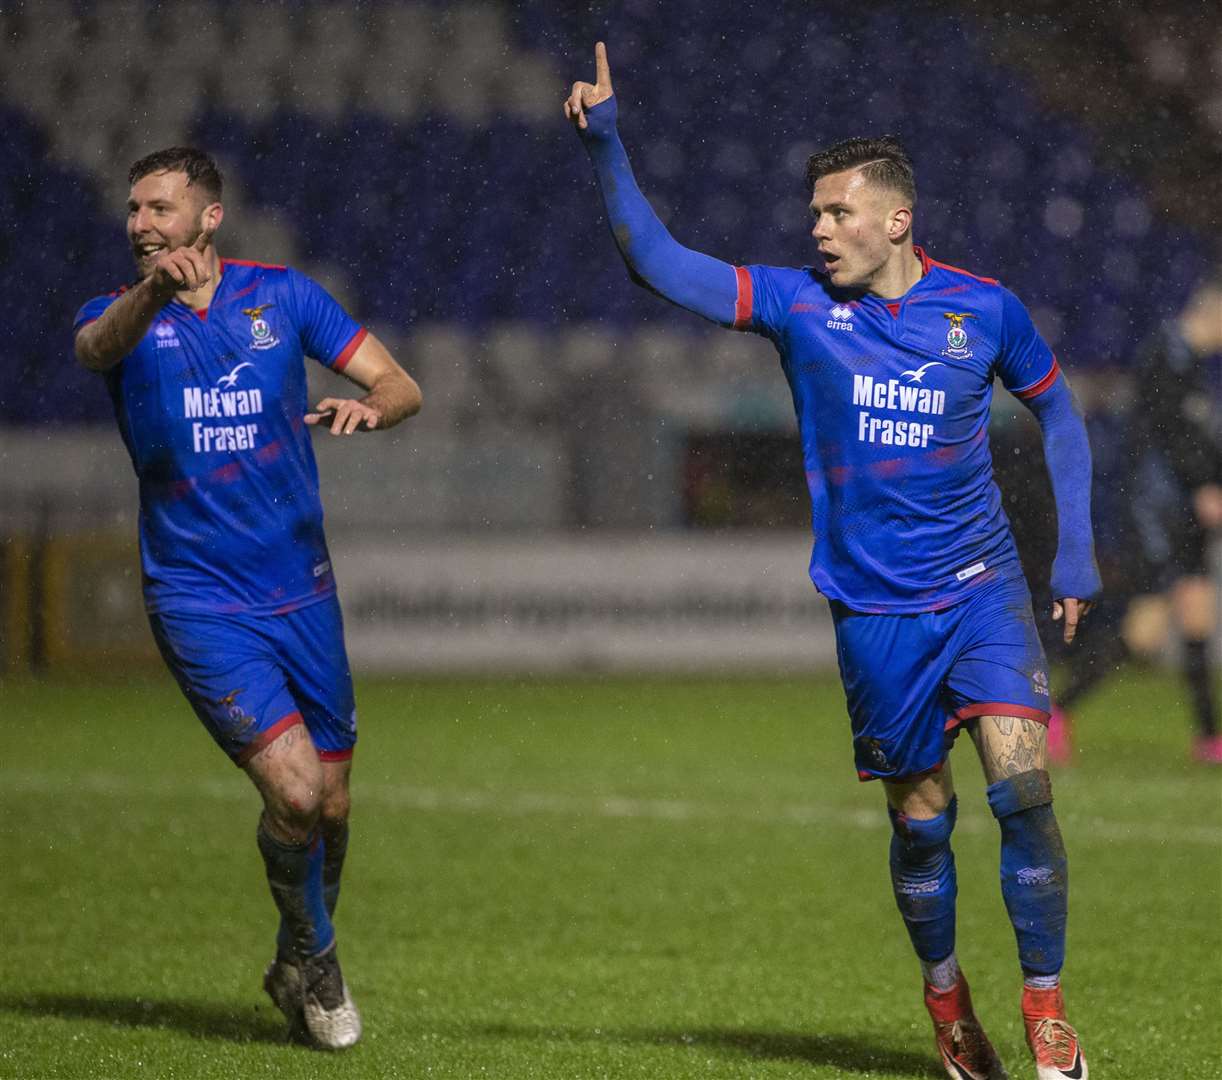 Picture - Ken Macpherson, Inverness. SCOTTISH CHALLENGE CUP - SEMI-FINAL. Inverness CT(2) v Rangers Colts(1).16.02.20. ICT's Miles Storey celebrates his winning goal.